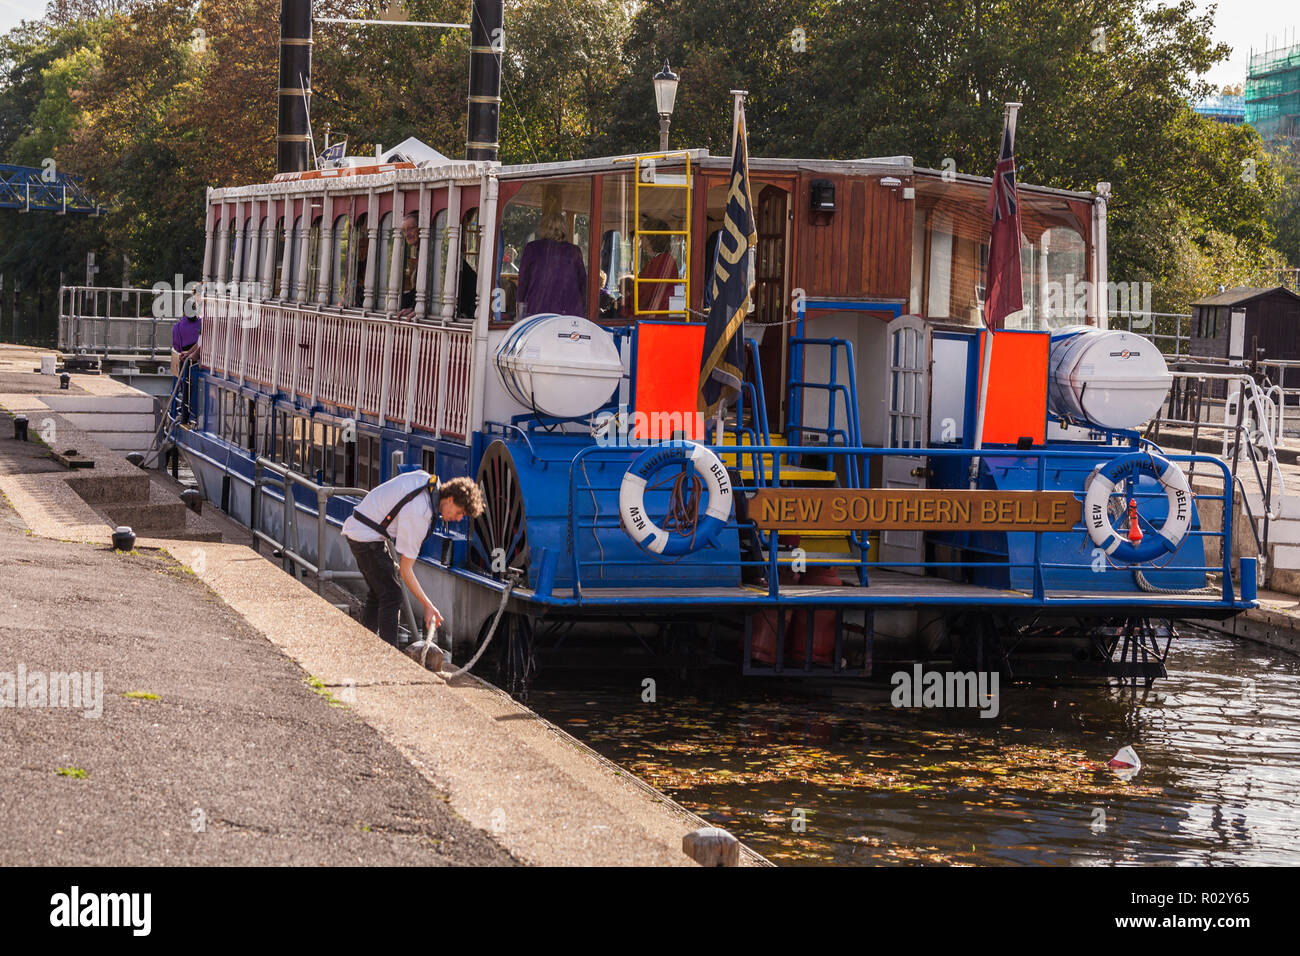 A man secures a cruise boat,the New Southern Belle, at Teddington Lock,England,UK Stock Photo